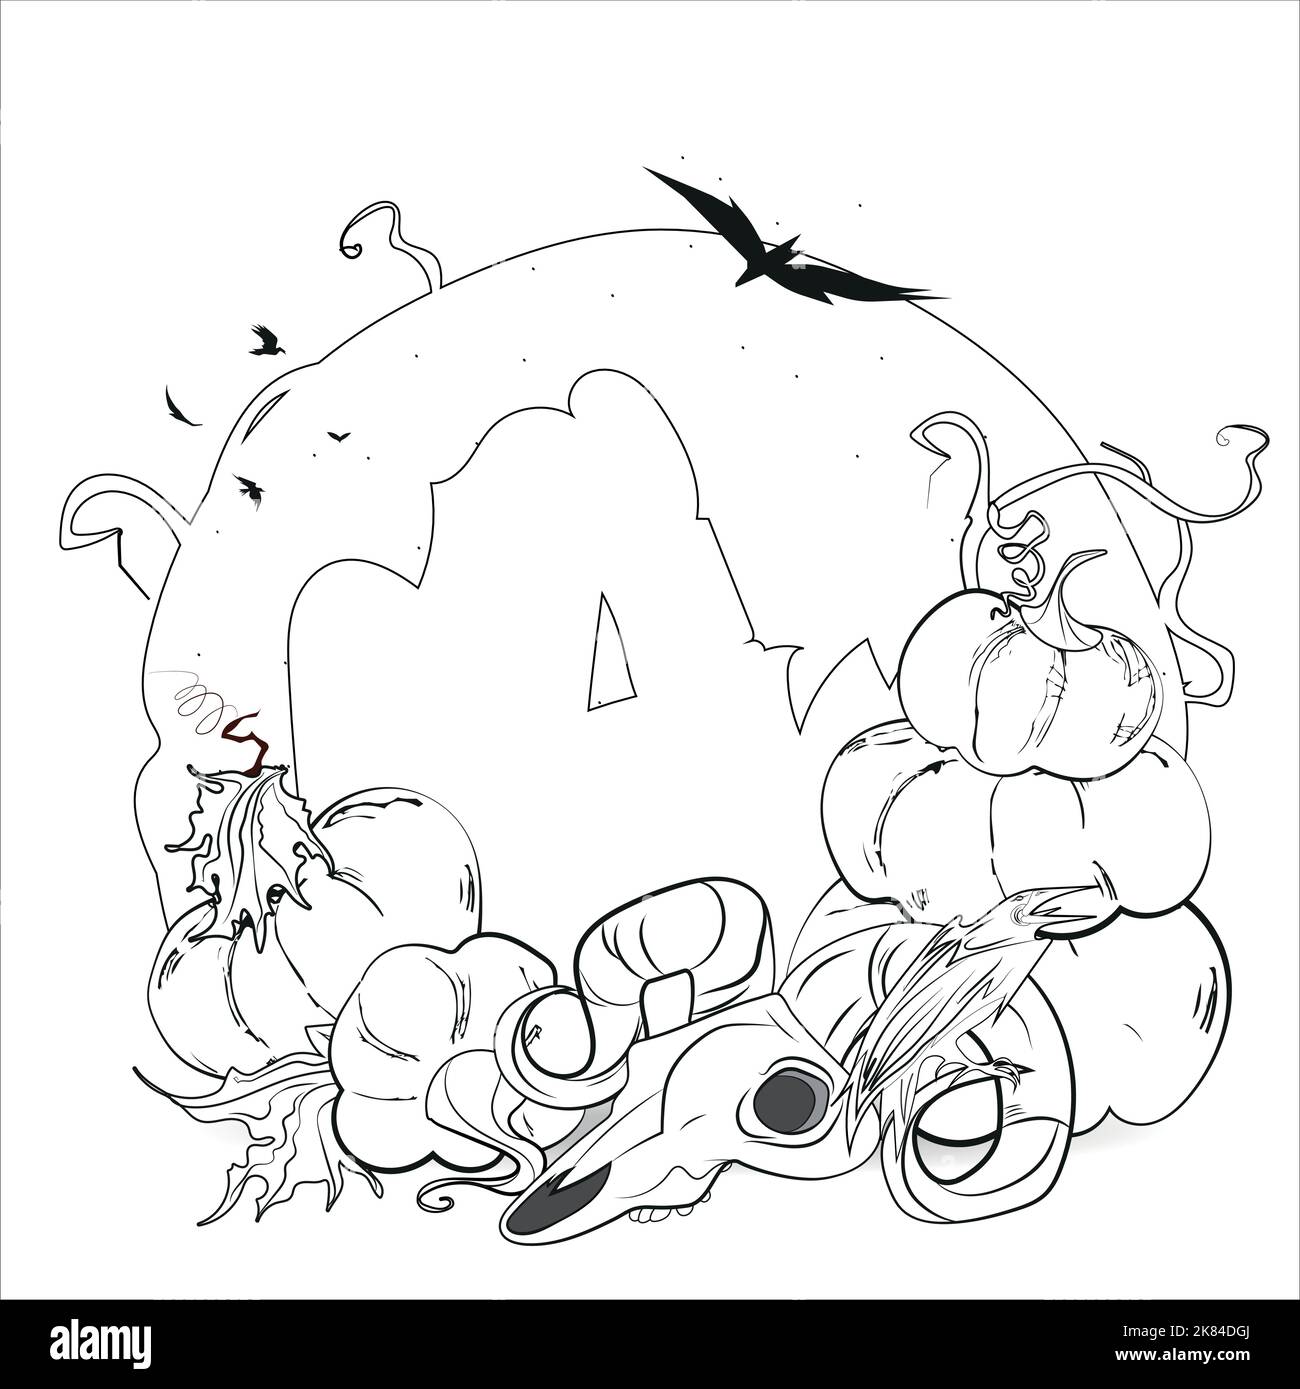 https://c8.alamy.com/comp/2K84DGJ/trick-or-treat-coloring-page-halloween-coloring-page-for-kids-cartoon-children-in-halloween-costumes-vector-illustration-2K84DGJ.jpg